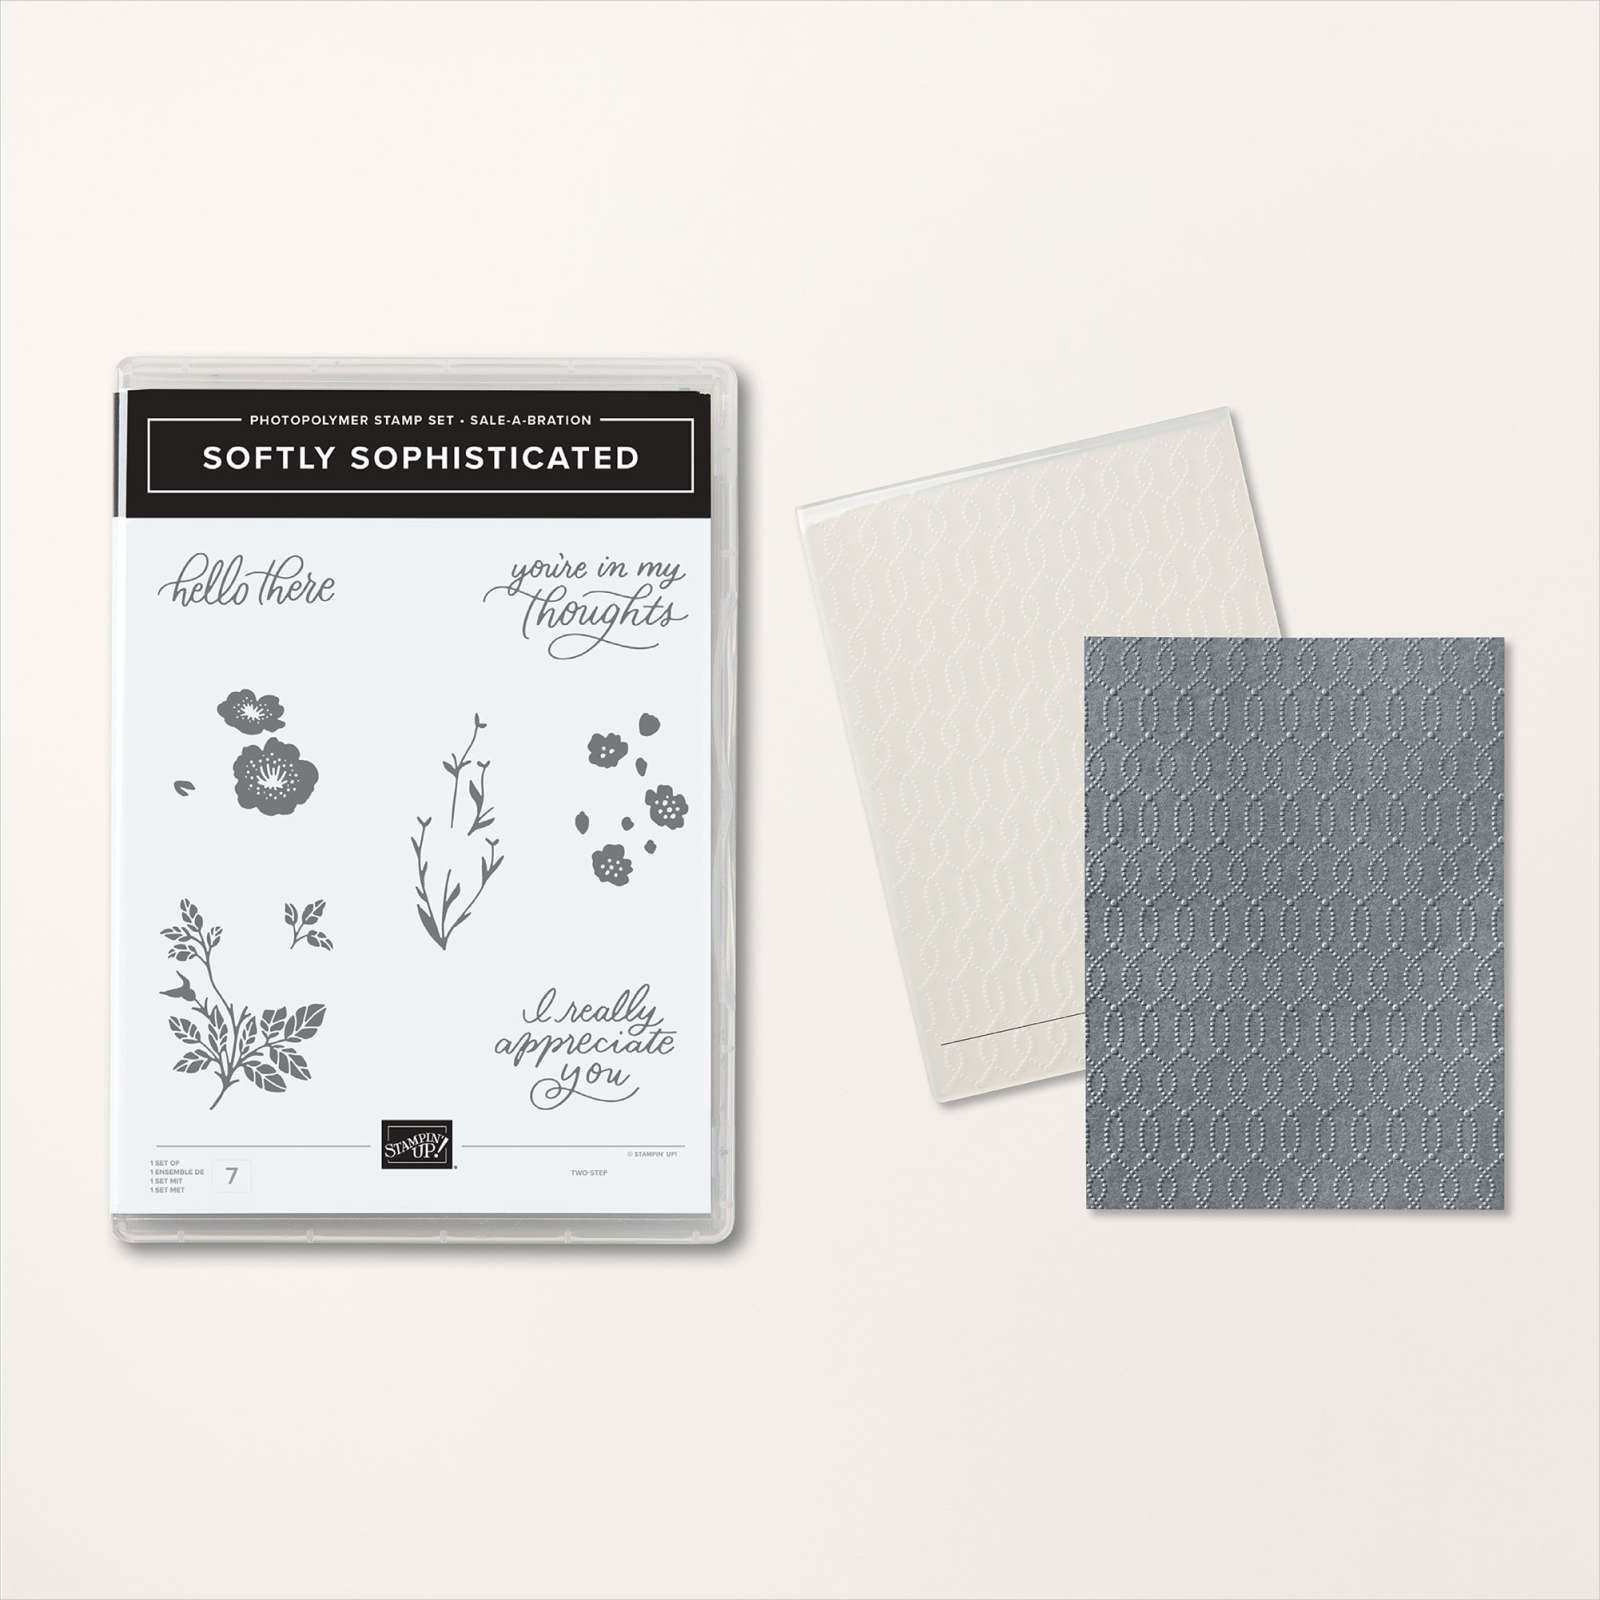 Stampin'Up! Old Olive Card Stock Ink Pad Refill Set